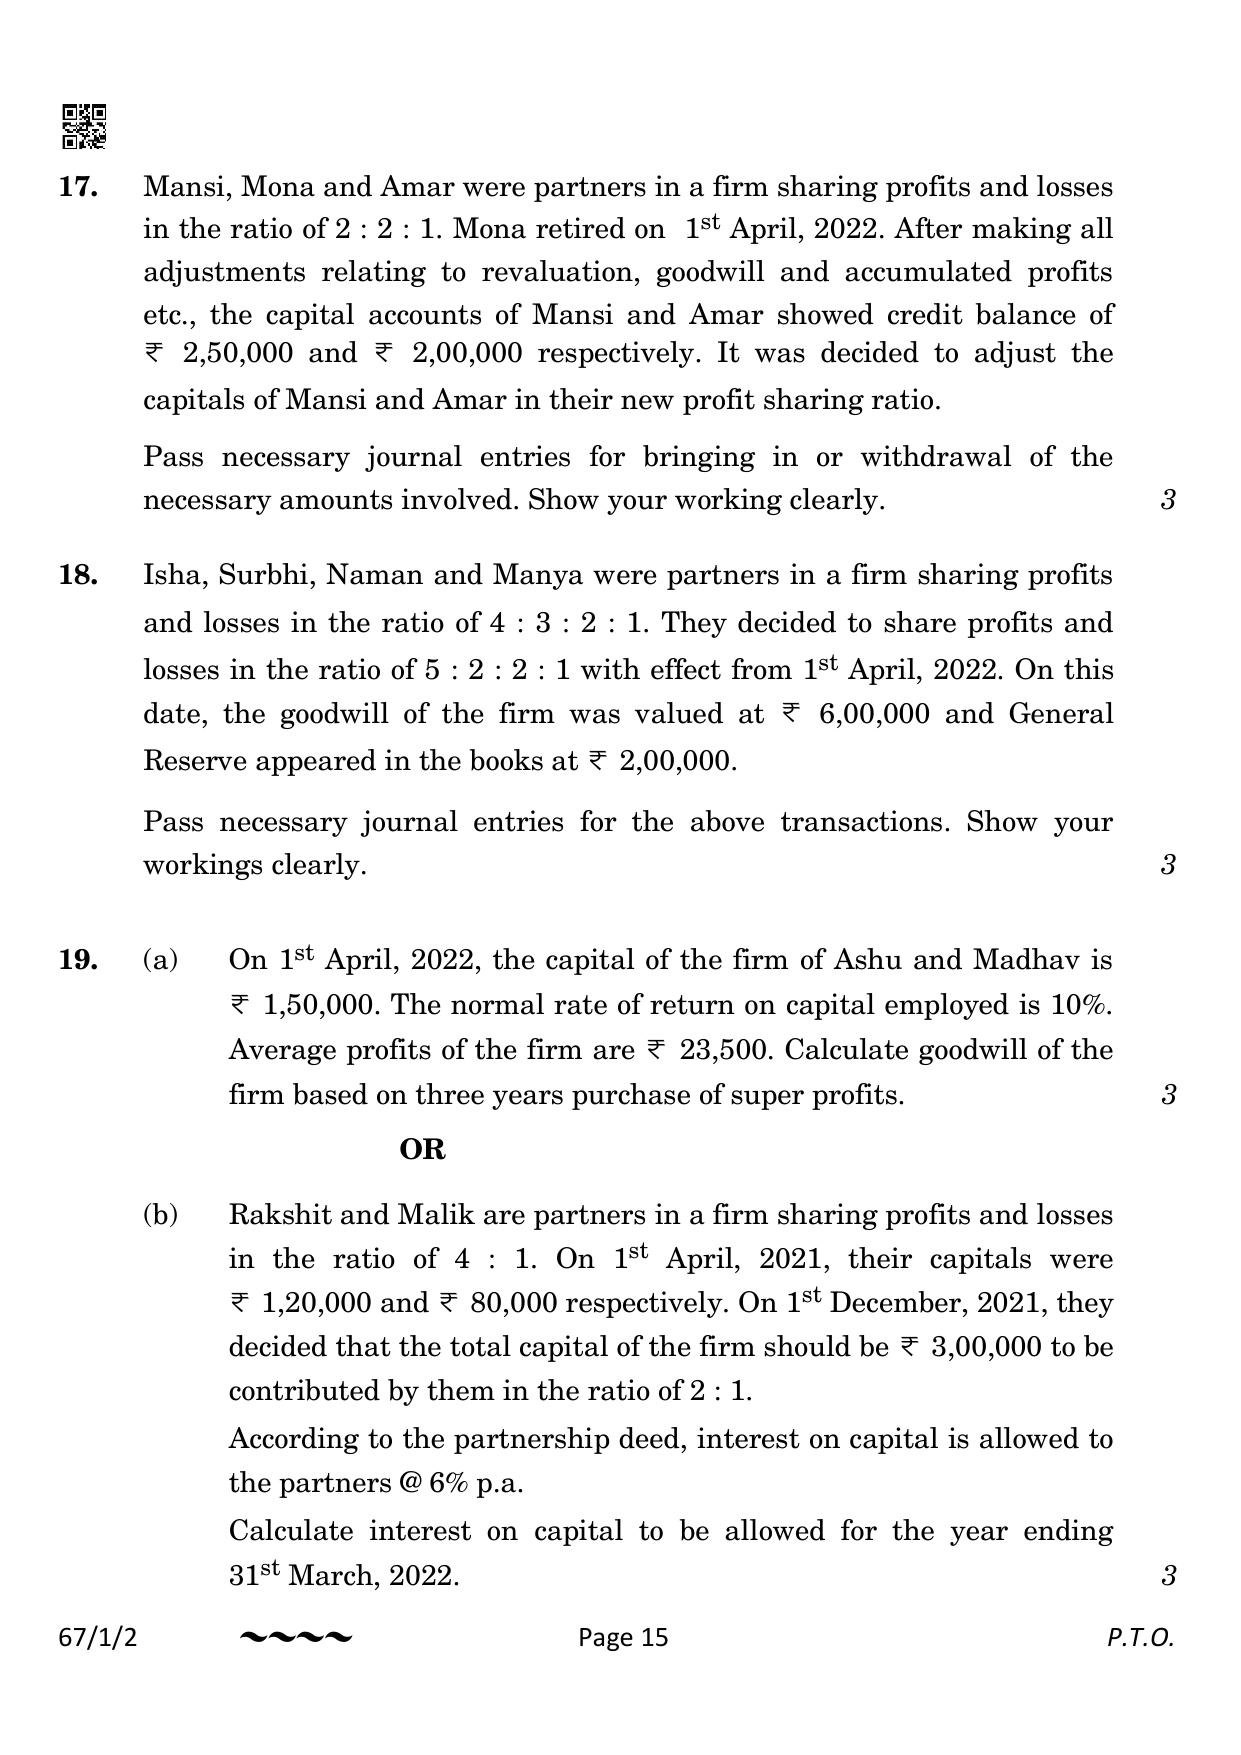 CBSE Class 12 67-1-2 Accountancy 2023 Question Paper - Page 15